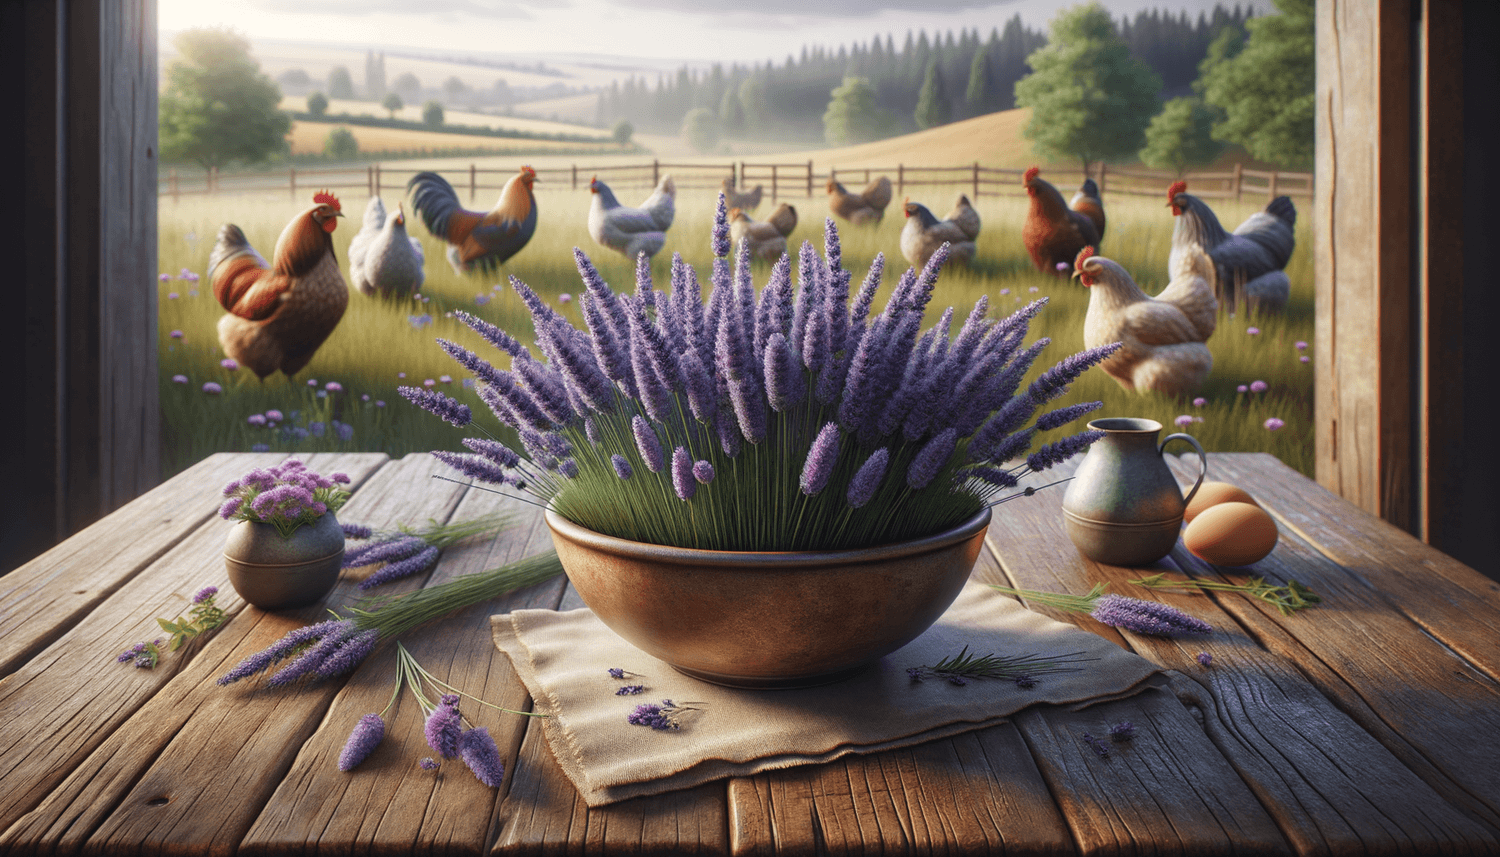 Can Chickens Eat Lavender Flowers?